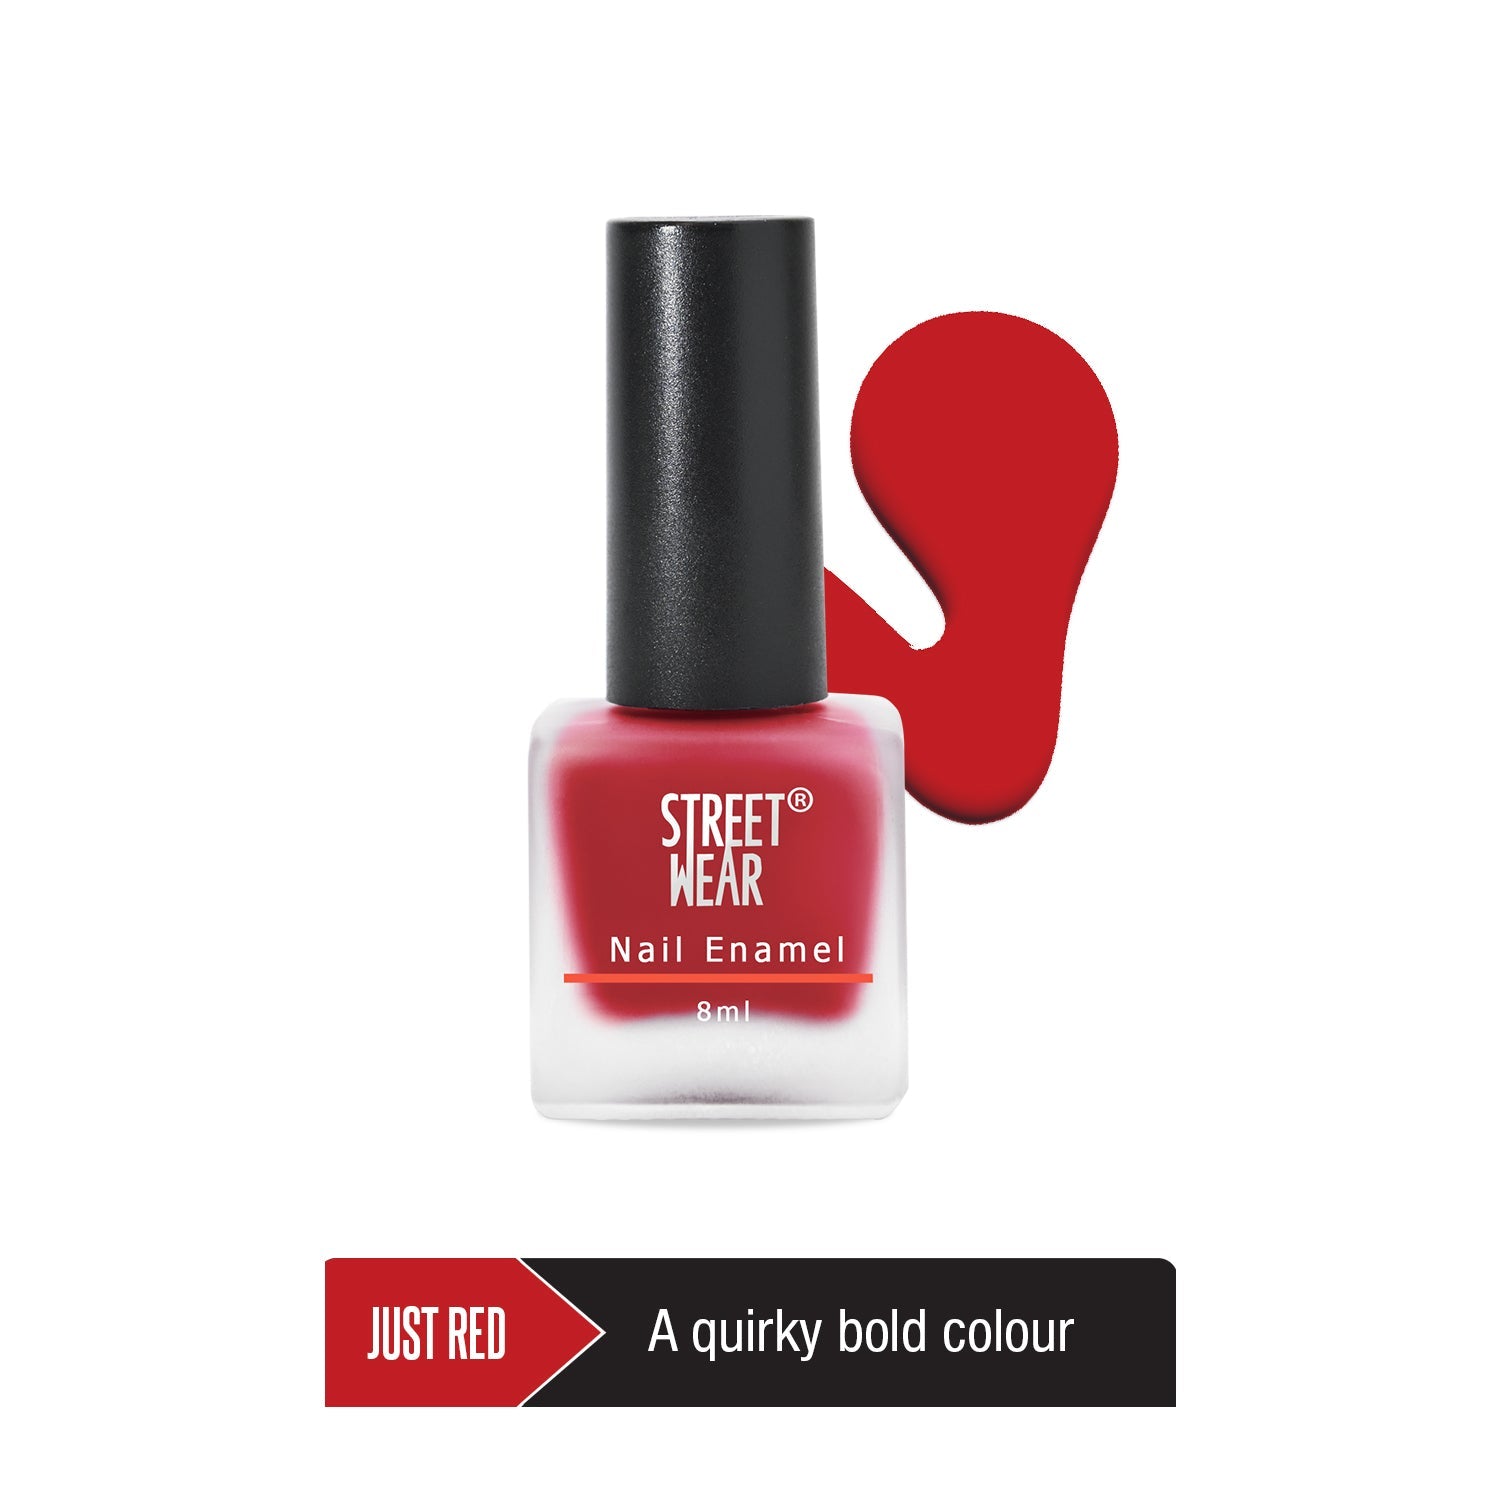 The Scholarly Nail: A Very Belated Fug Friday - Revlon Streetwear Moody  a.k.a The Single Ugliest Nail Polish in the History of Everything